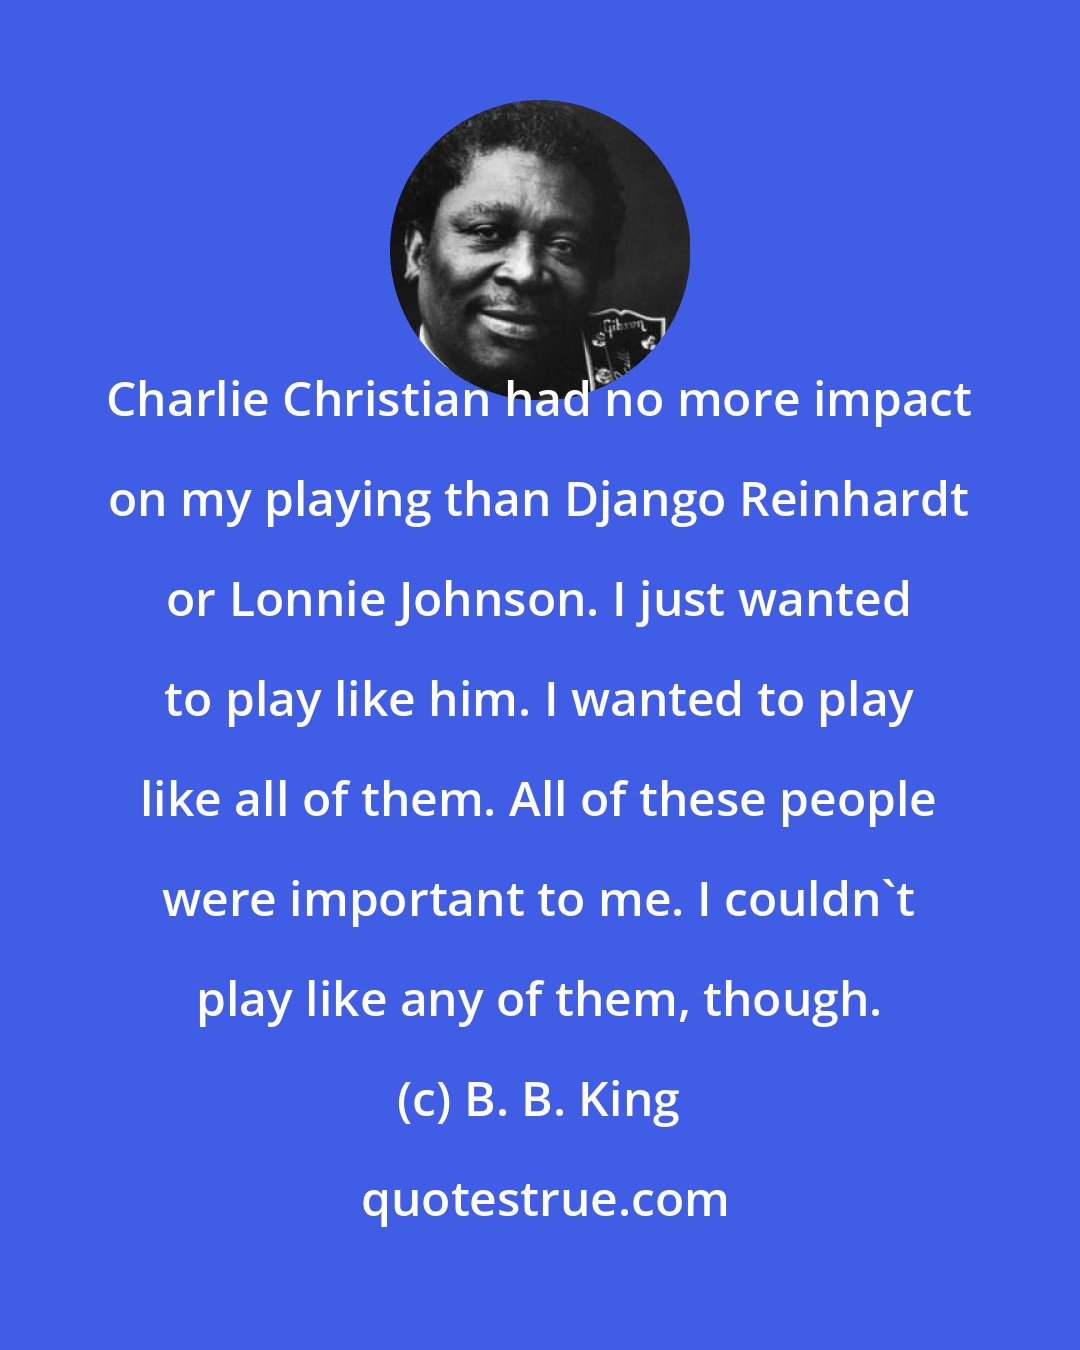 B. B. King: Charlie Christian had no more impact on my playing than Django Reinhardt or Lonnie Johnson. I just wanted to play like him. I wanted to play like all of them. All of these people were important to me. I couldn't play like any of them, though.